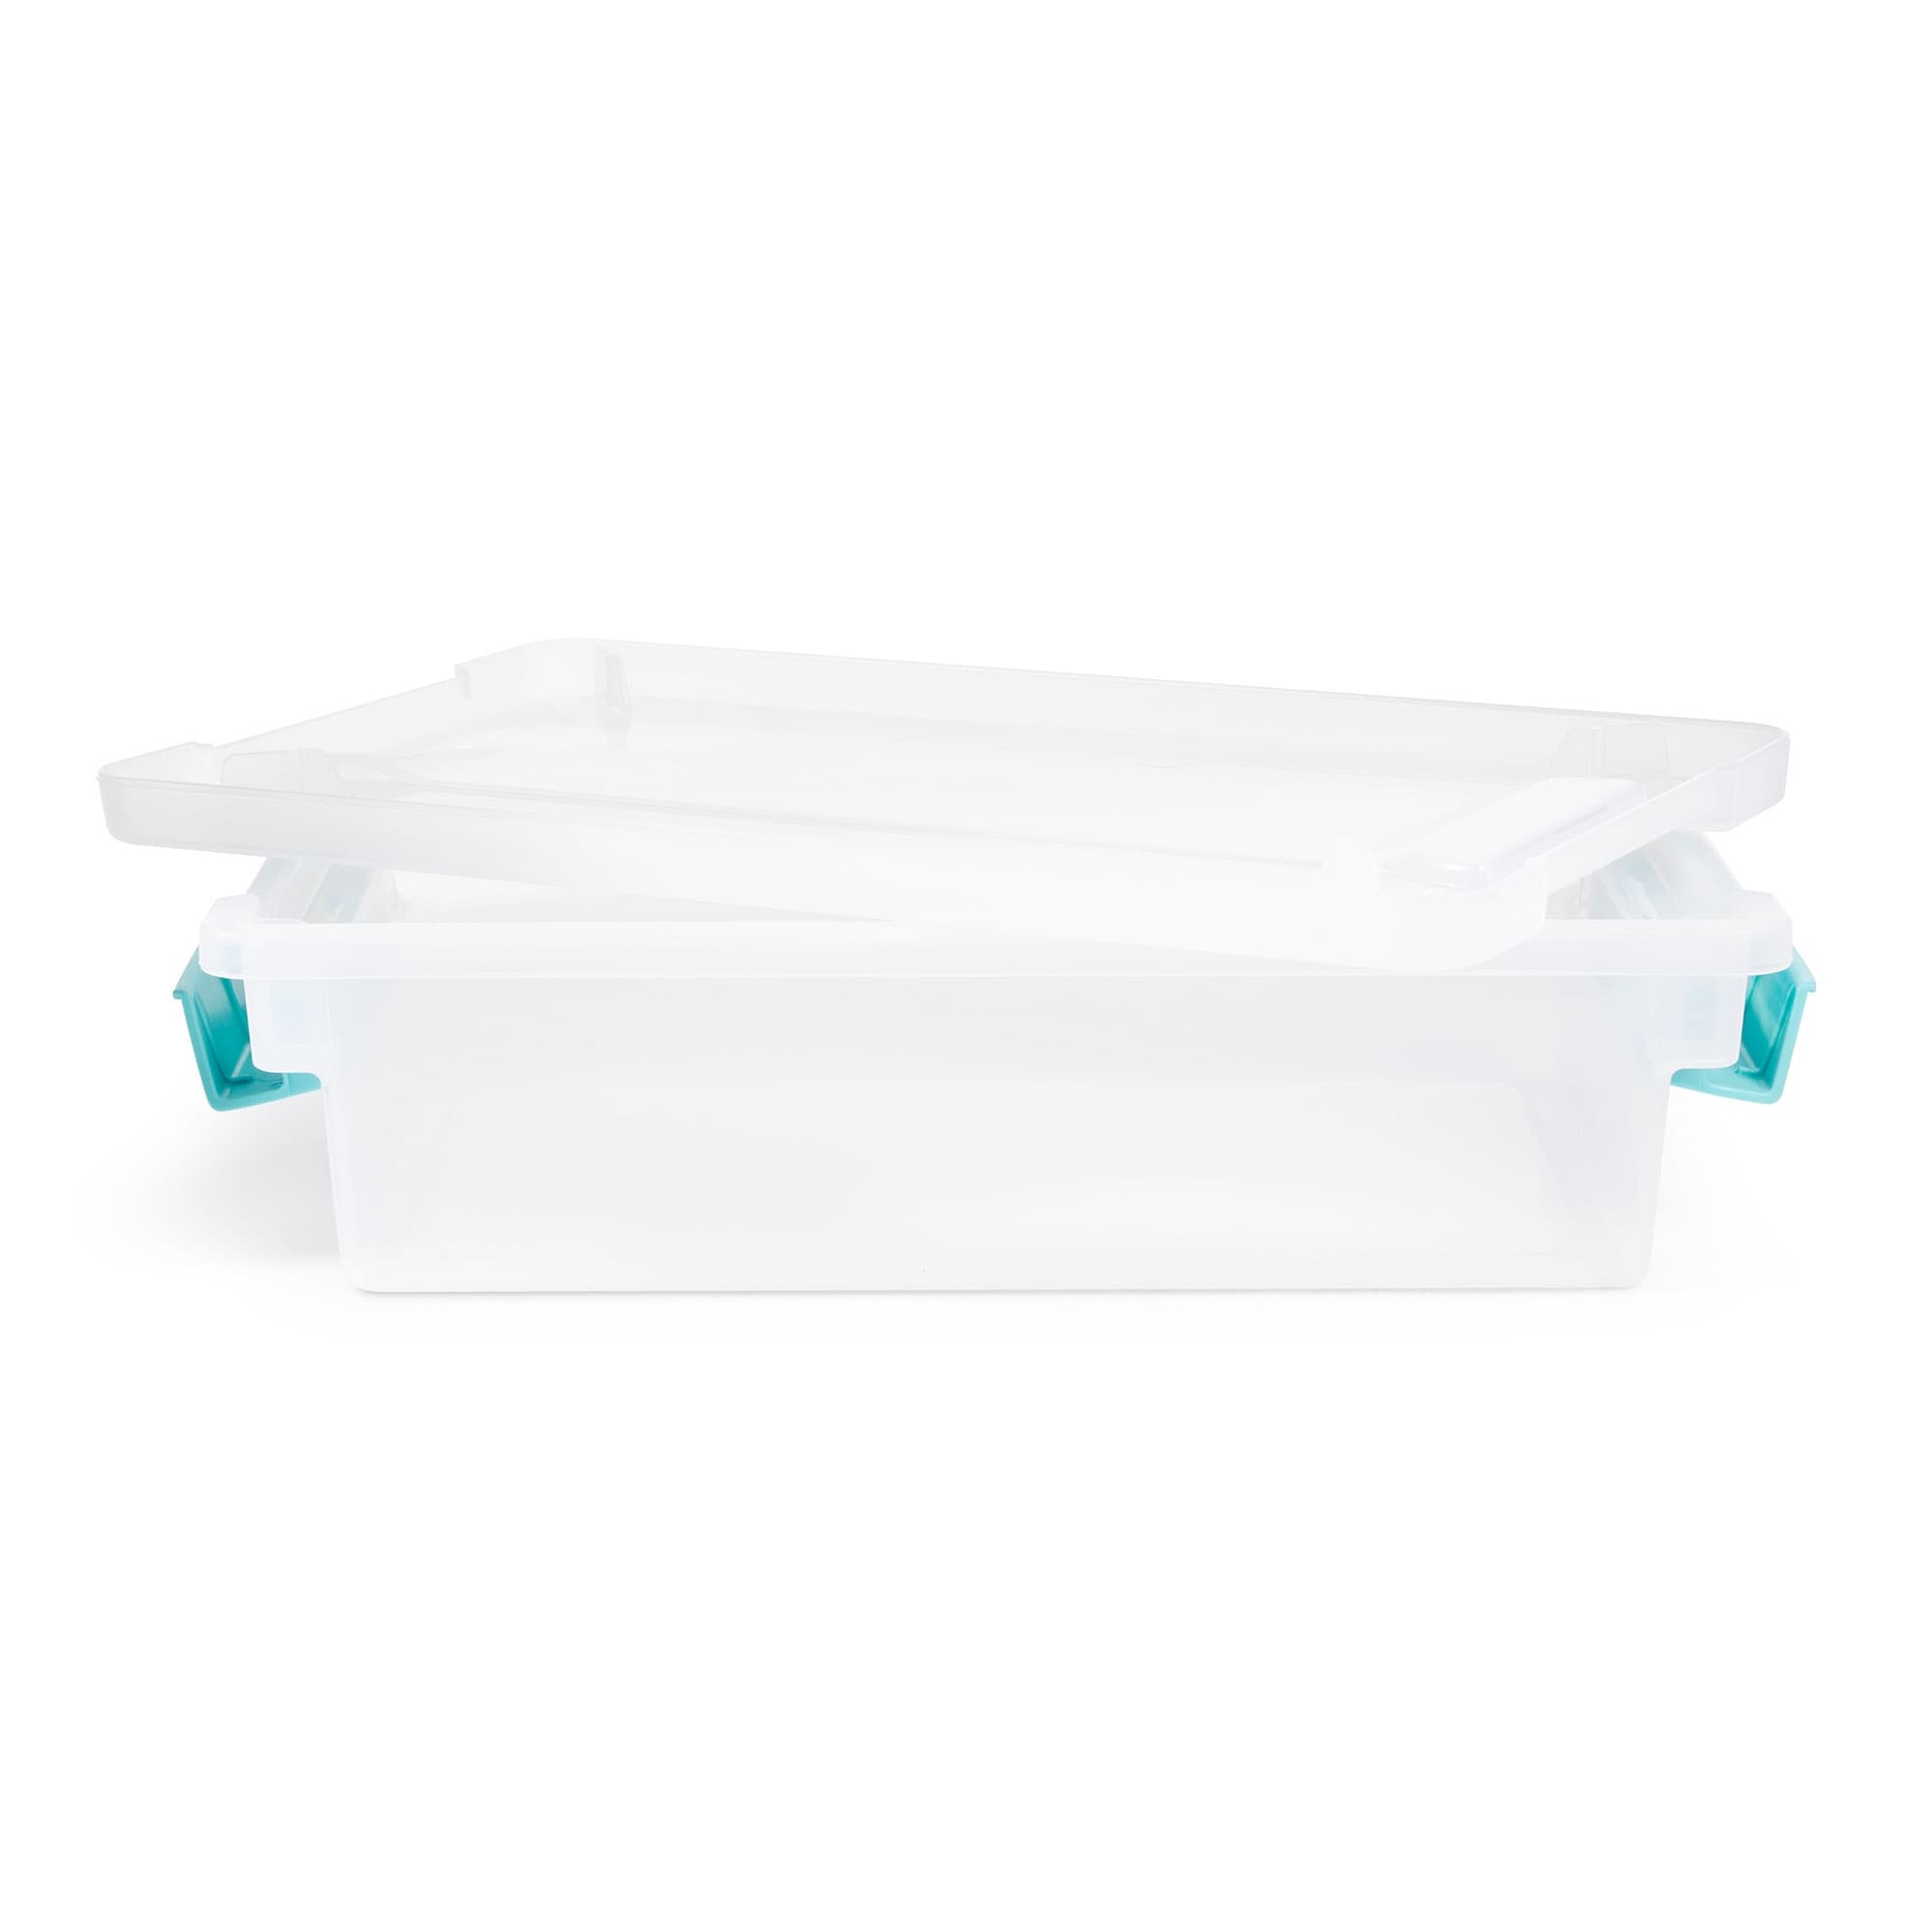 https://ak1.ostkcdn.com/images/products/is/images/direct/1e5b0e4cce08cebae8161f113b28049a91444cb6/Sterilite-Small-Clip-Box-Clear-Storage-Tote-Container-with-Latching-Lid%2C-12-Pack.jpg